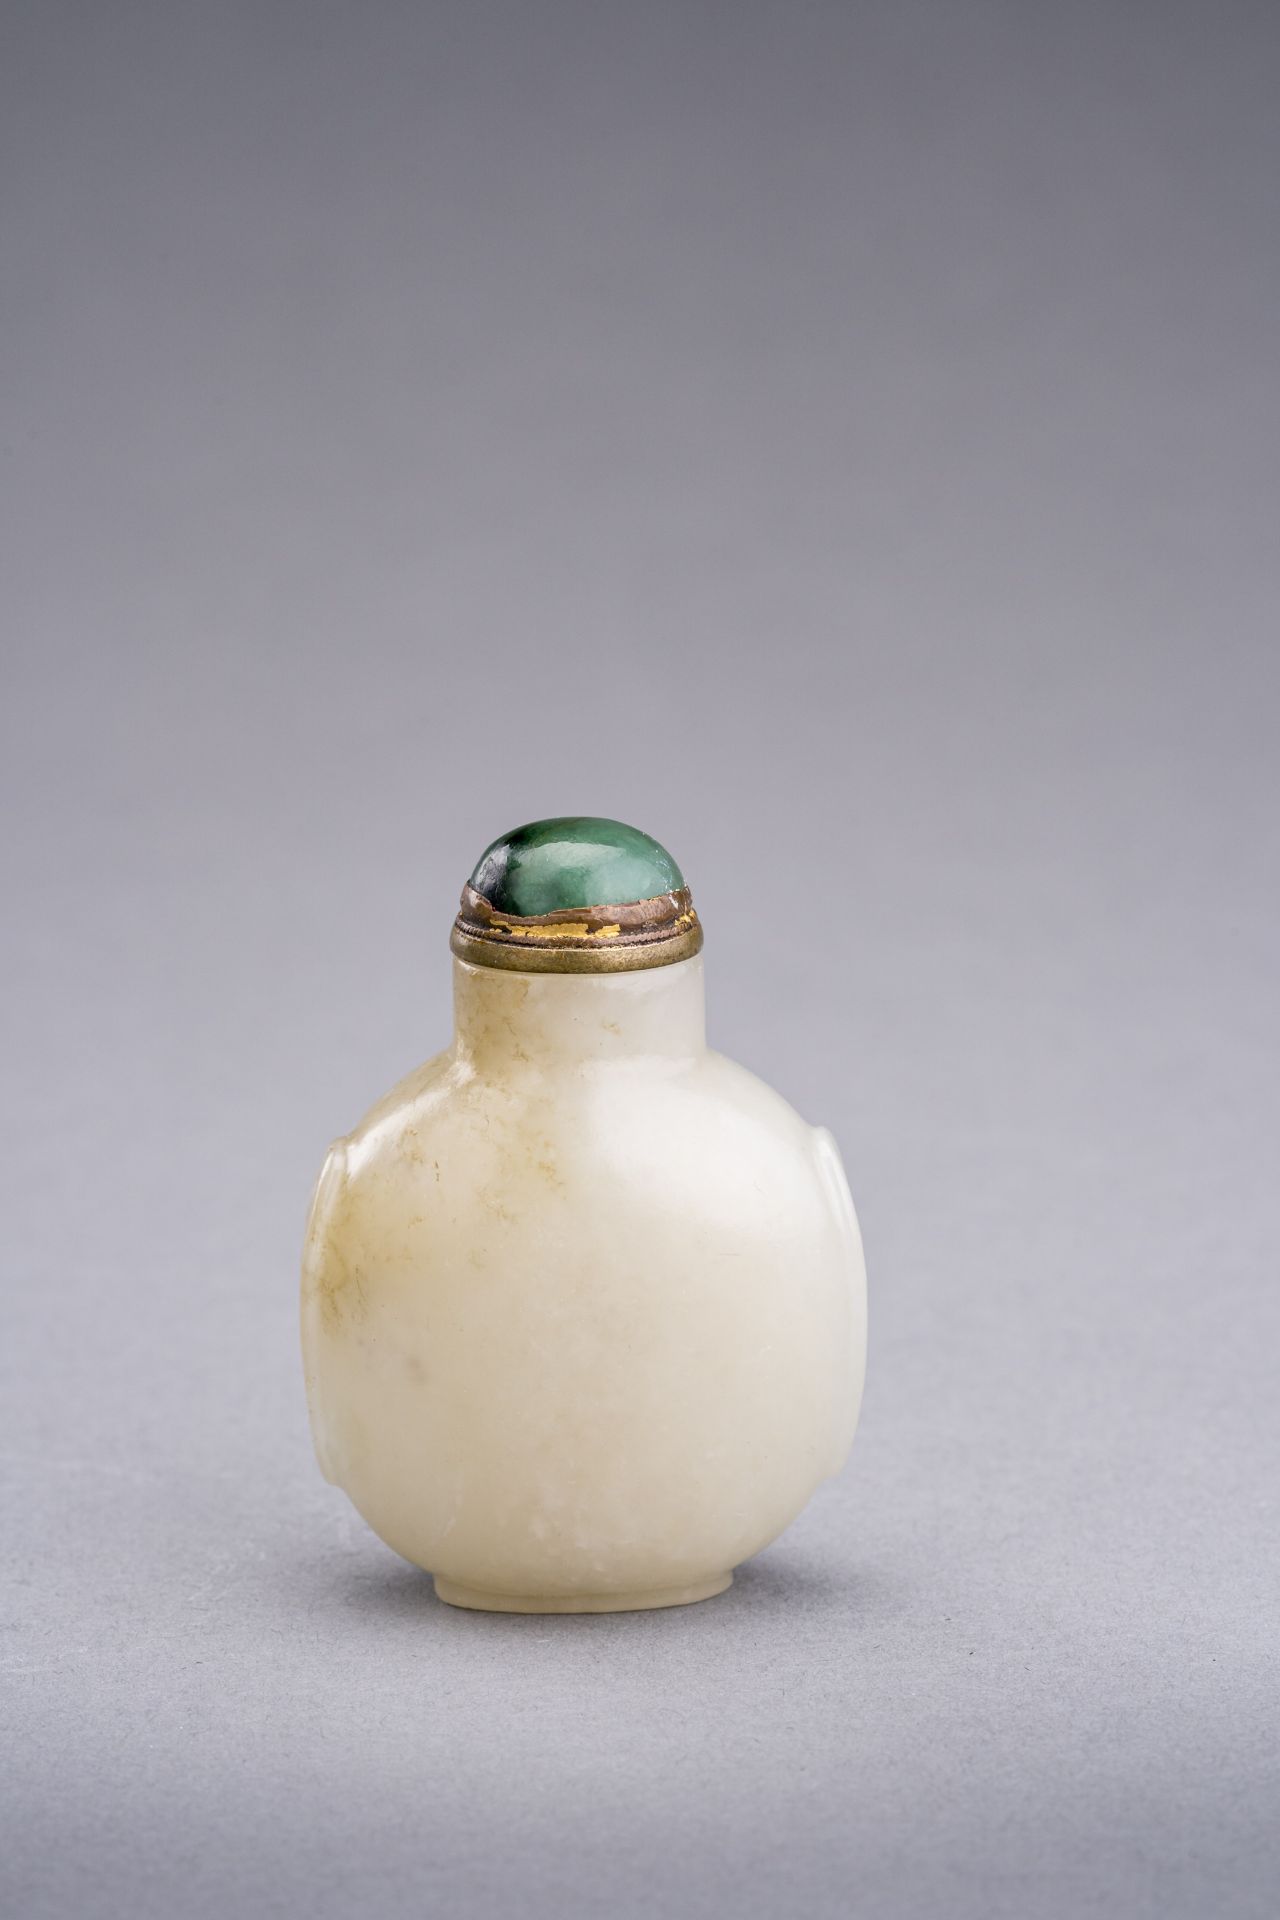 A CELADON JADE SNUFF BOTTLE, QING DYNASTY - Image 3 of 6